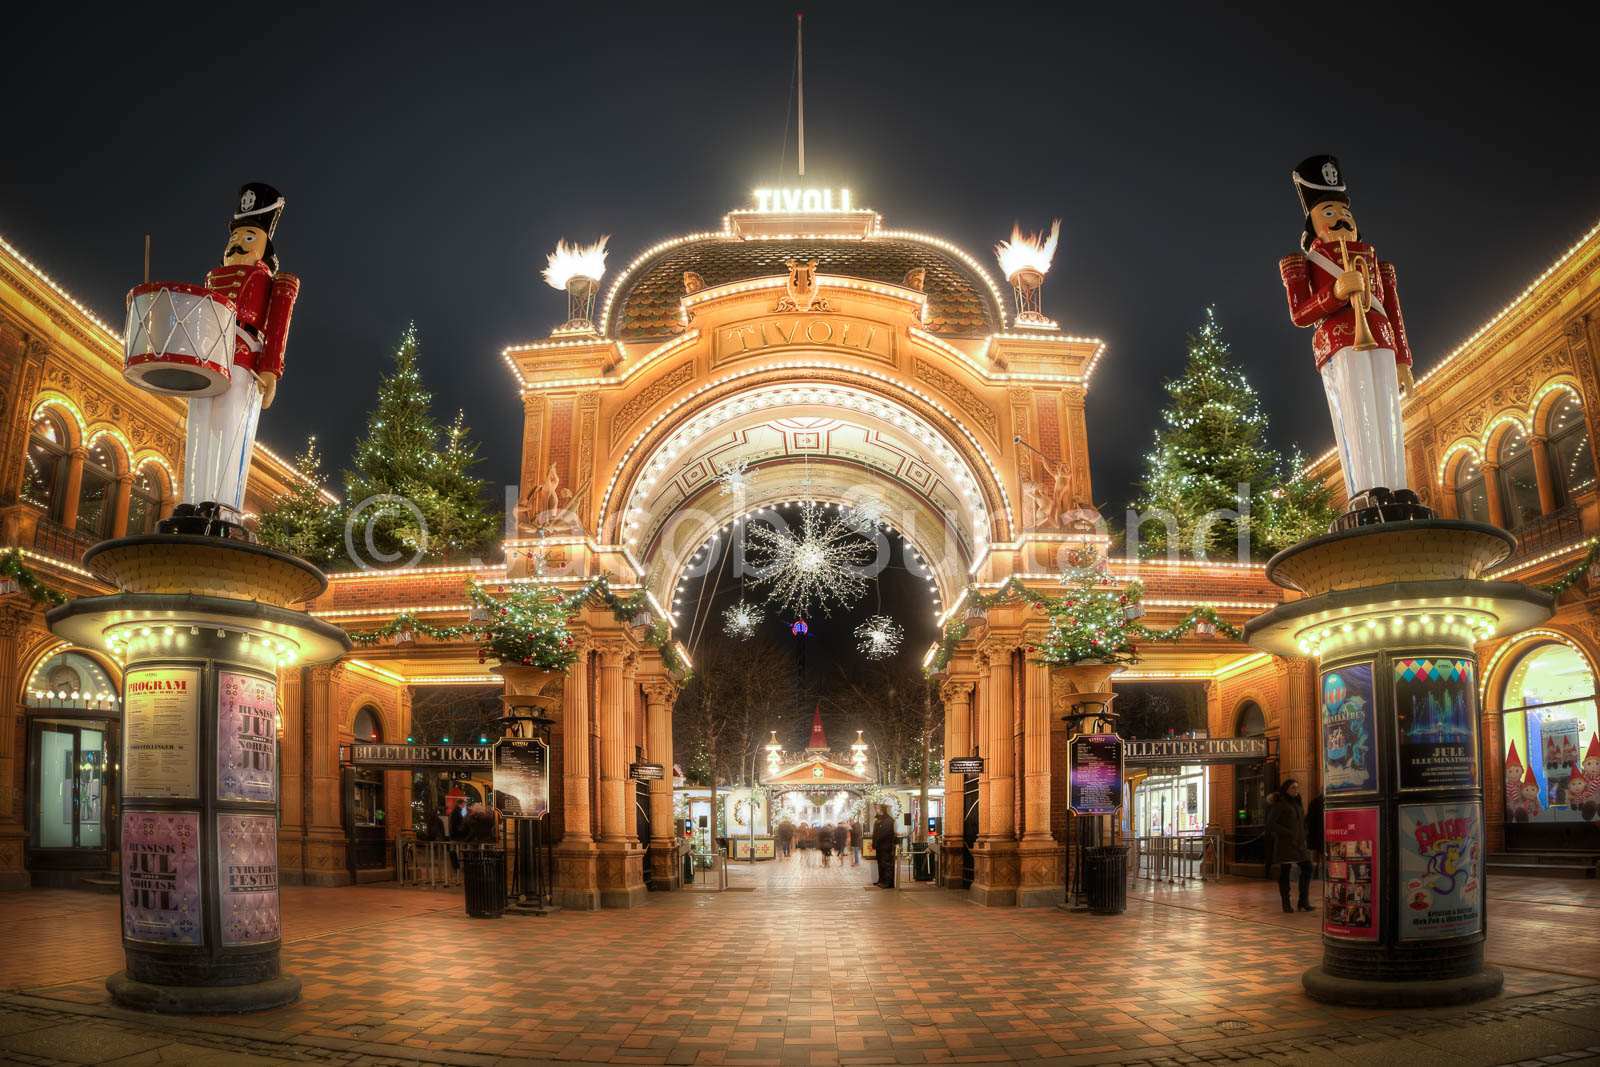 Copenhagen Tivoli Gardens is the second oldest amusements parks in the world. At Christmas they open with Christmas Stalls where you can buy all kinds goodies for your belly and go around and get a true Christmas feeling. Absolutelly very recommendable if you ever go to Copenhagen during Christmast. This is the main entrance. Photo by: Jacob Surland, www.caughtinpixels.com